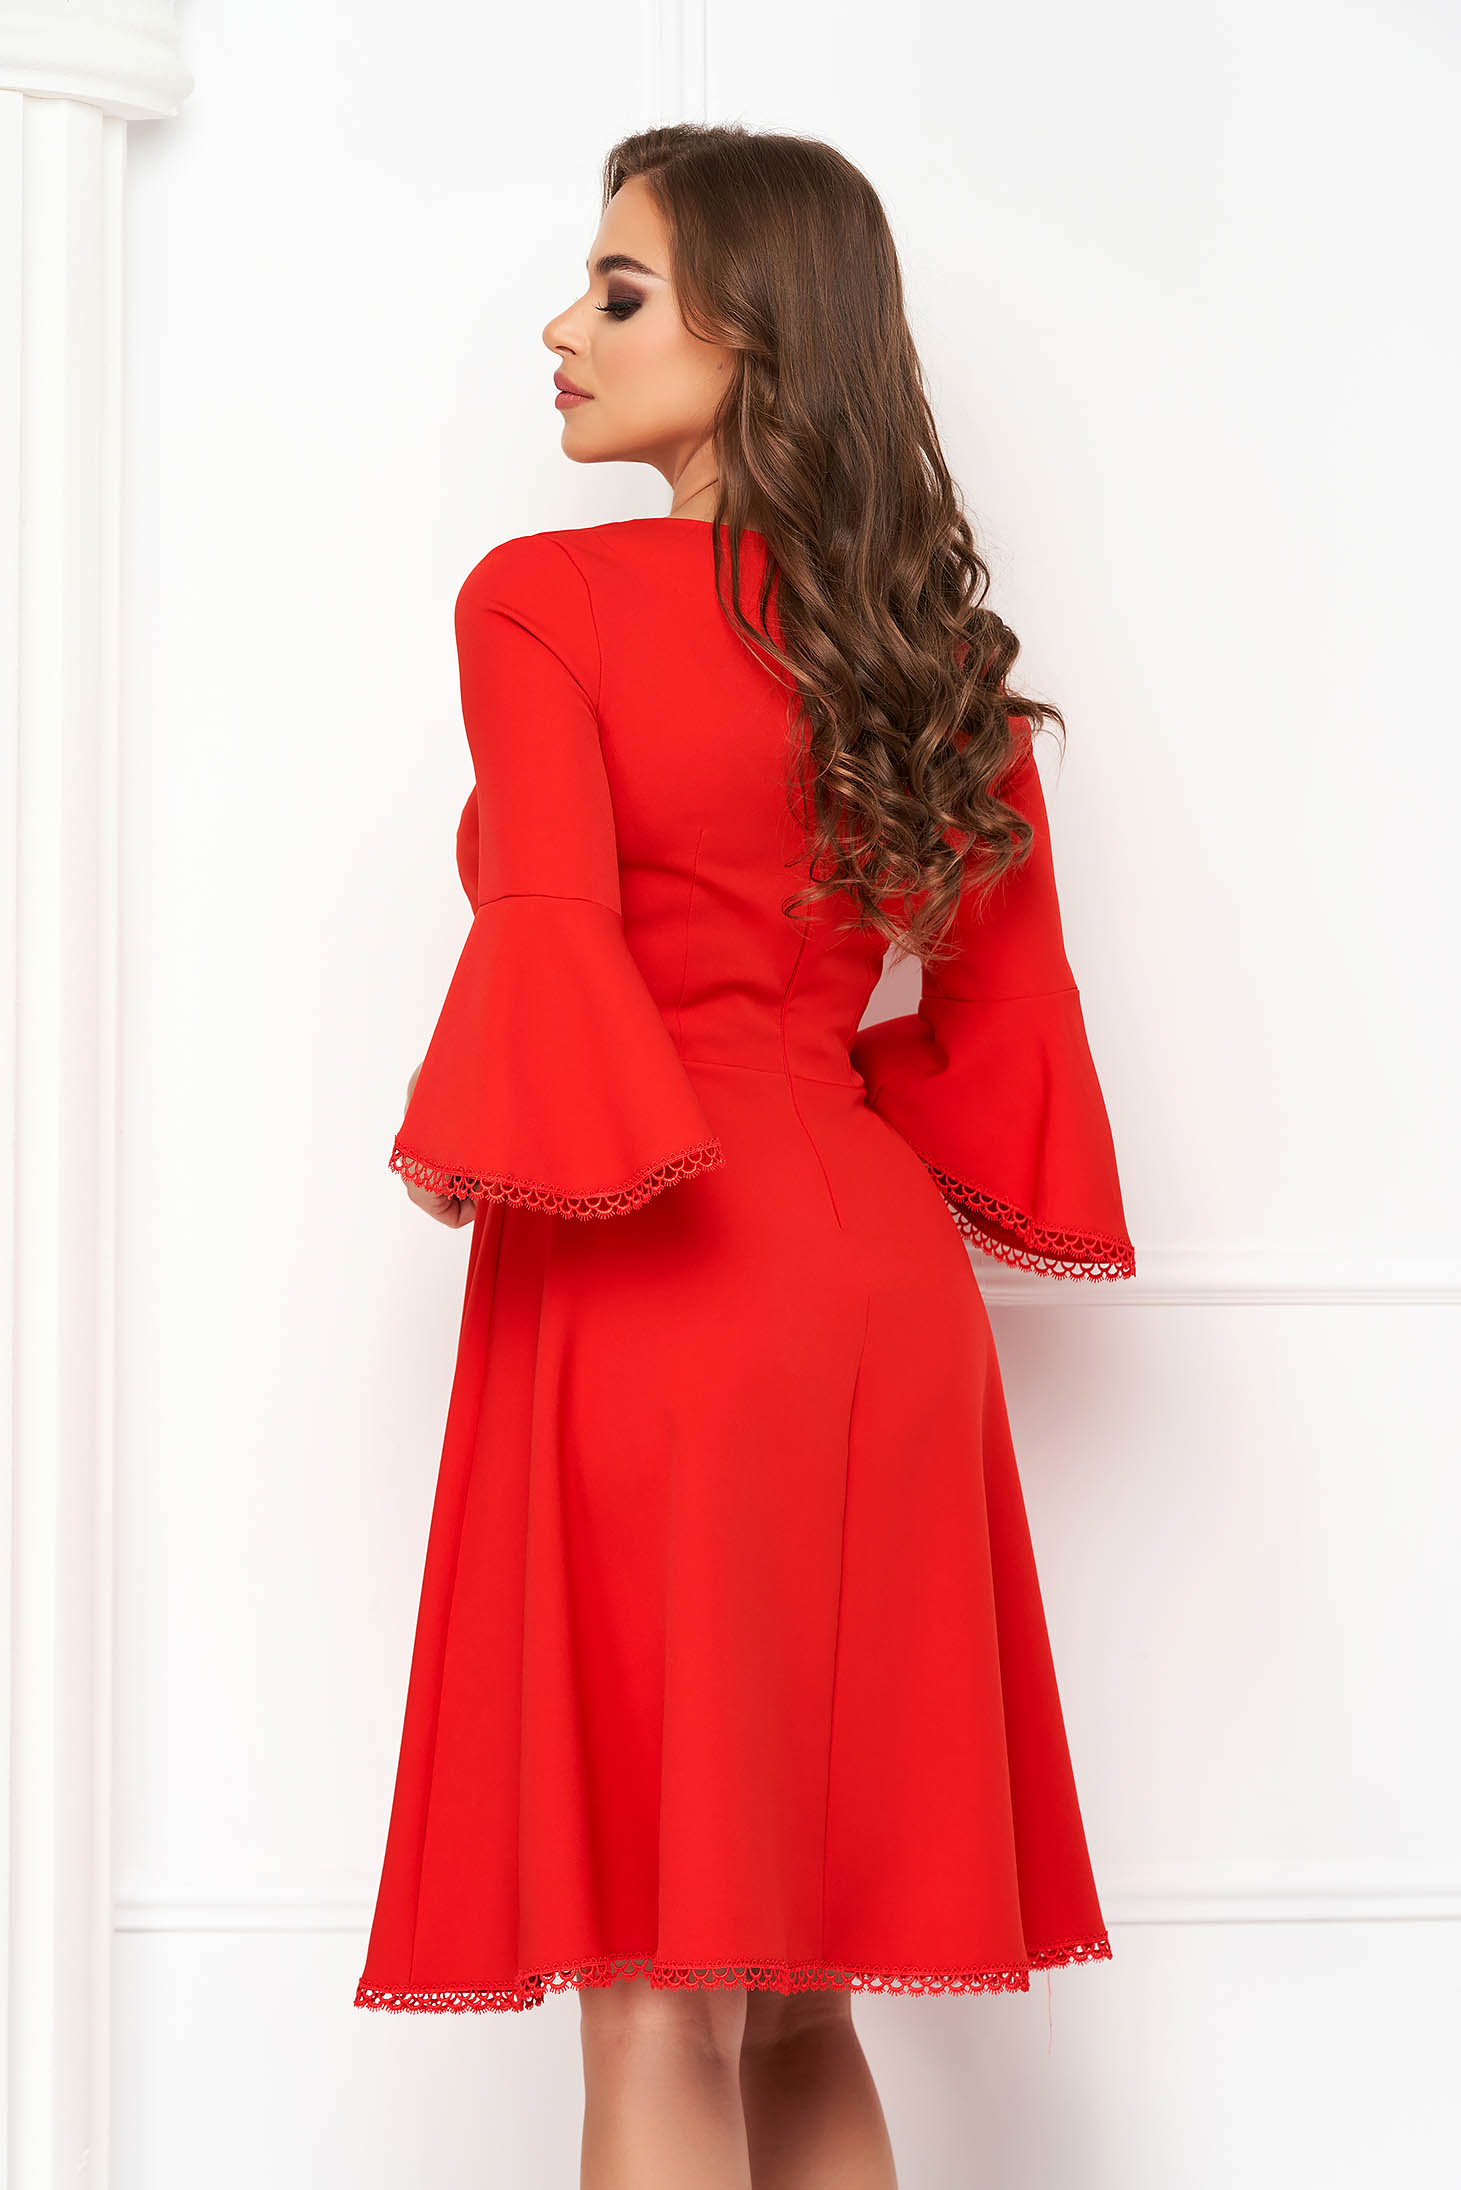 Red Elastic Fabric Dress in Clos with Ruffle Sleeve - StarShinerS 2 - StarShinerS.com